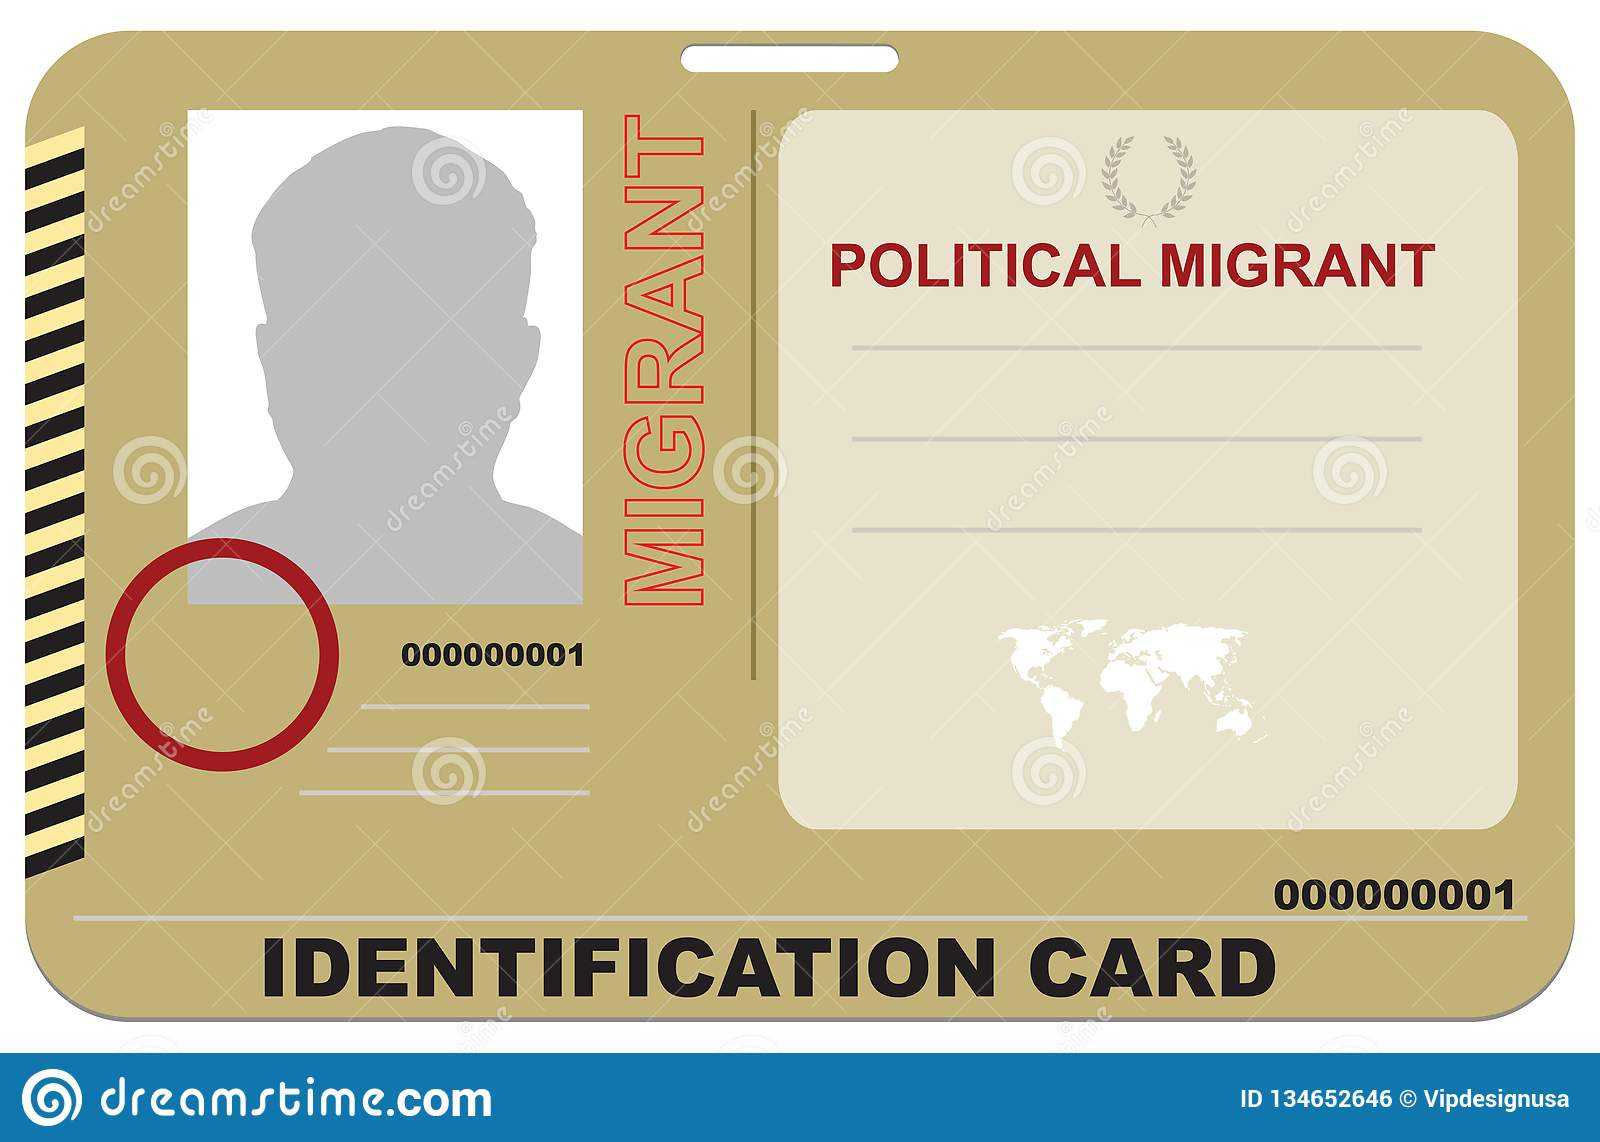 Identification Card Political Migrant Stock Vector Within Mi6 Id Card Template